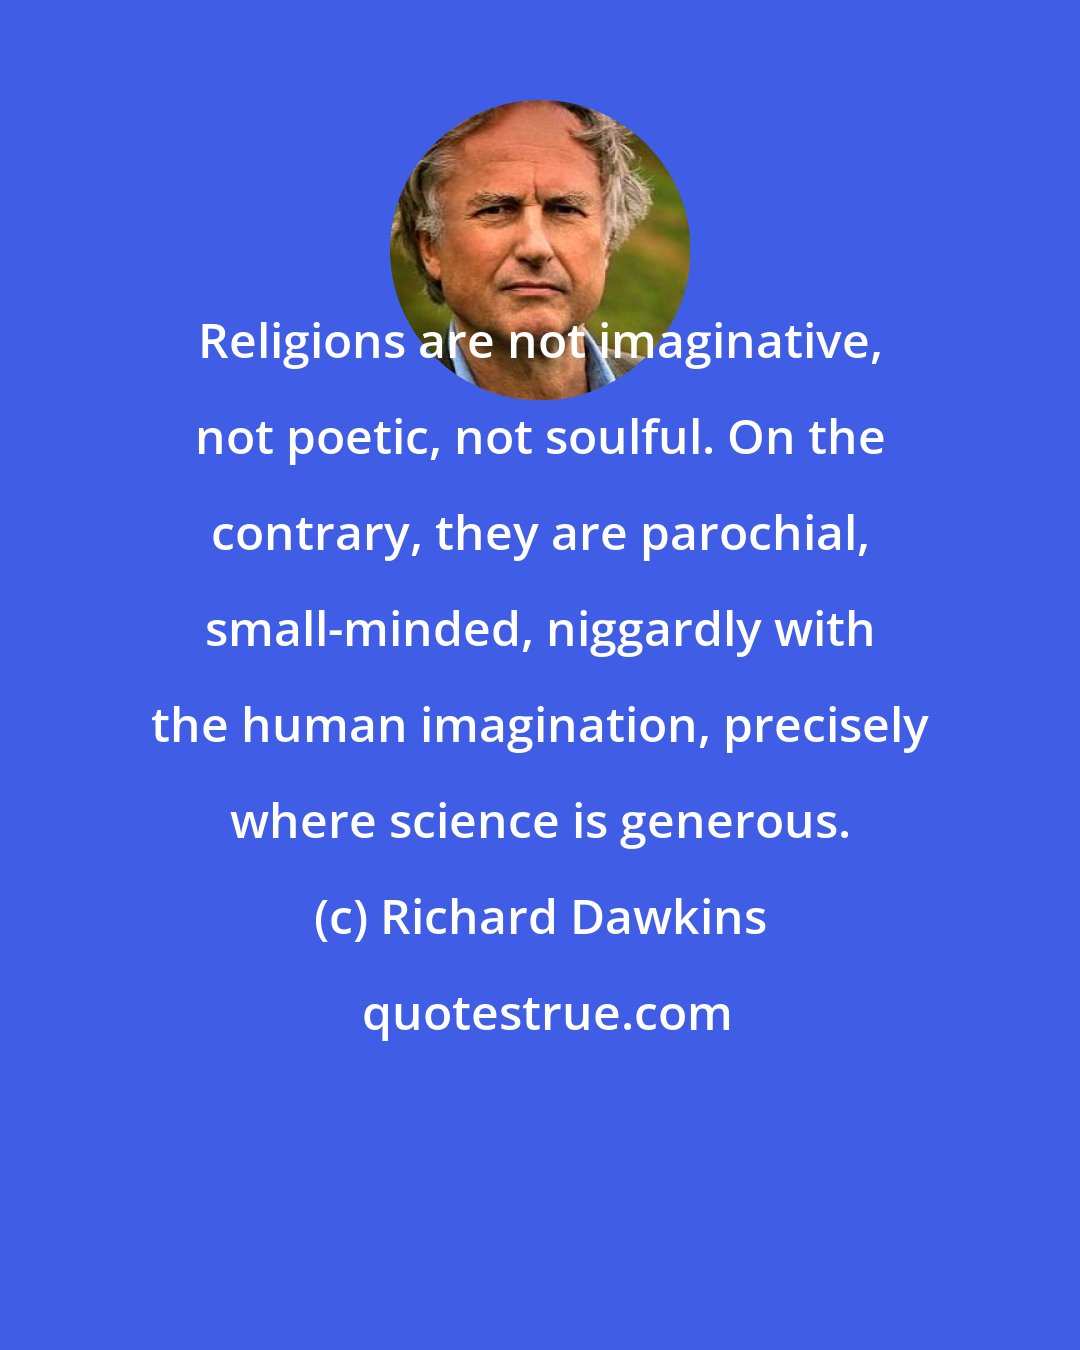 Richard Dawkins: Religions are not imaginative, not poetic, not soulful. On the contrary, they are parochial, small-minded, niggardly with the human imagination, precisely where science is generous.